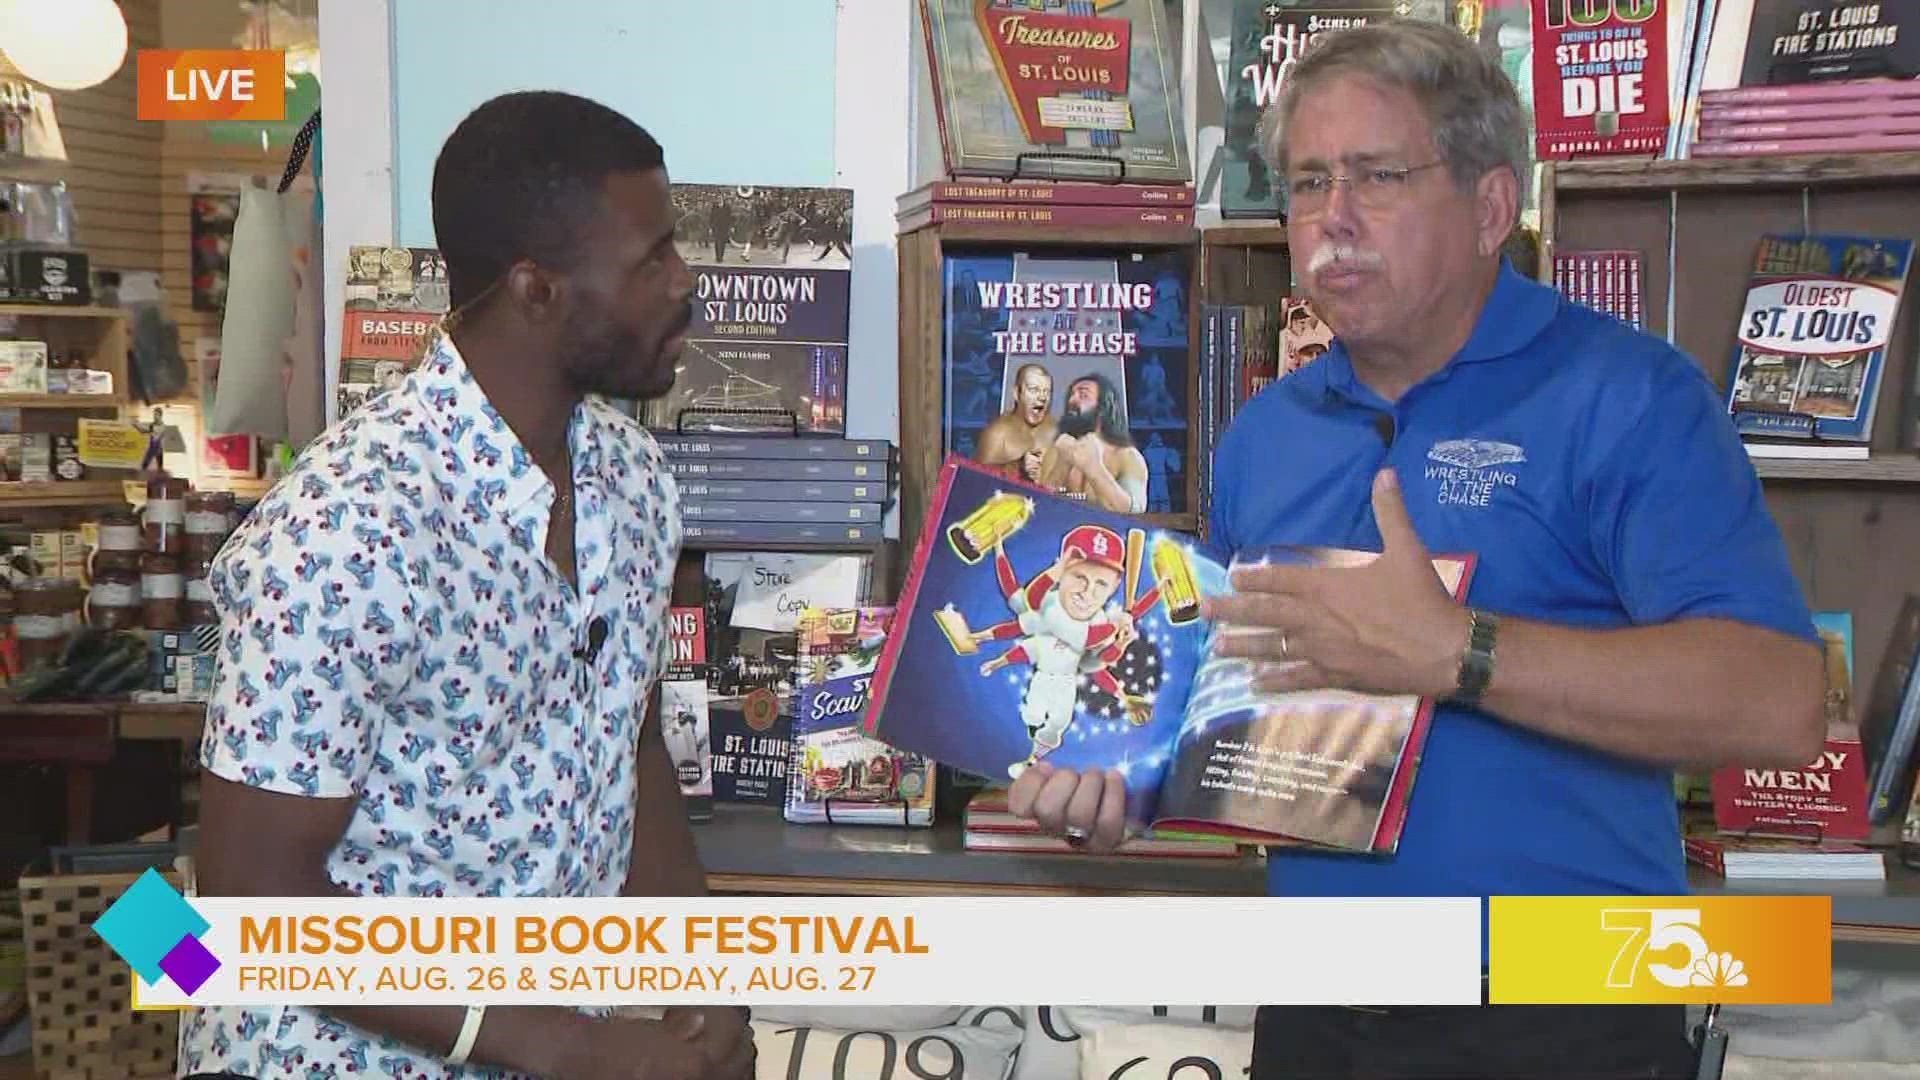 Ed Wheatley joins Malik Wilson to discuss the MO. Book Festival. The event takes place 8/26 & 8/27 in Washington, MO. For more info visit, missouribookfestival.com.